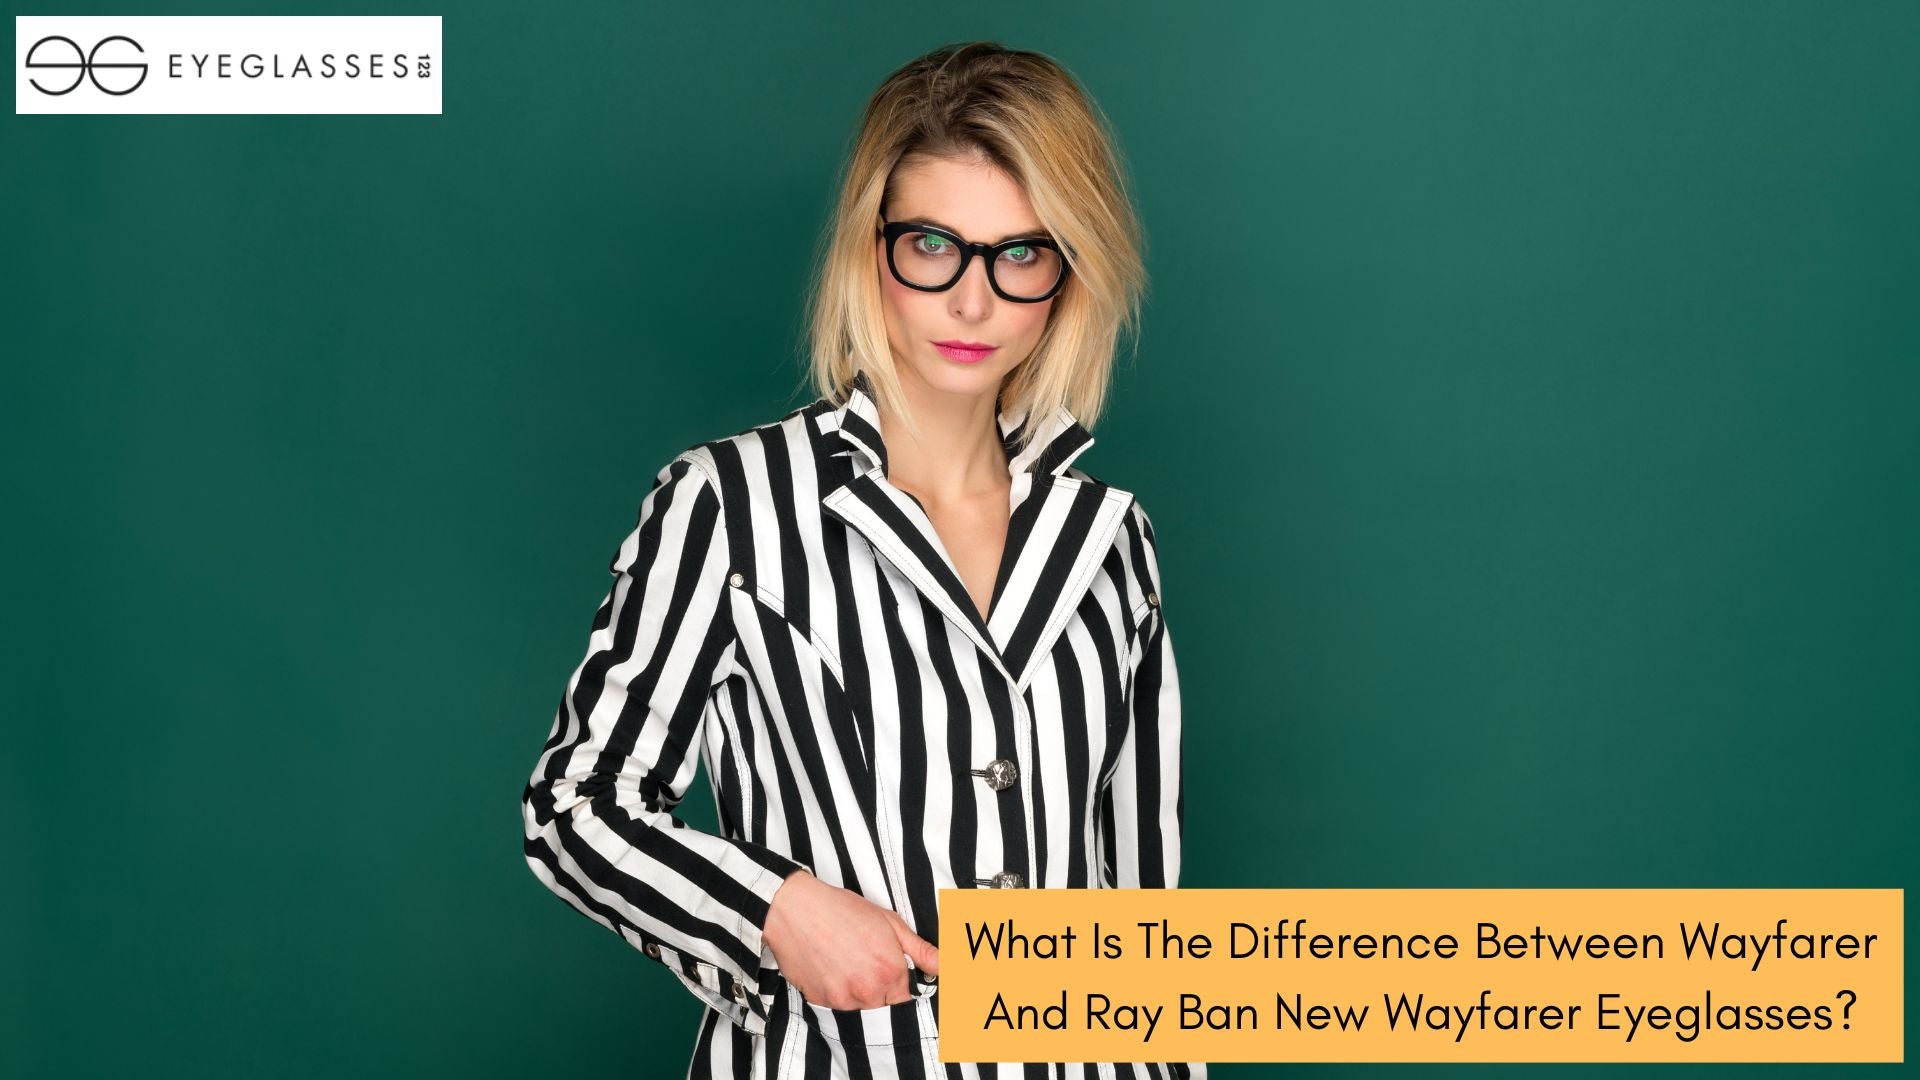 What Is The Difference Between Wayfarer And Ray Ban New Wayfarer Eyeglasses?